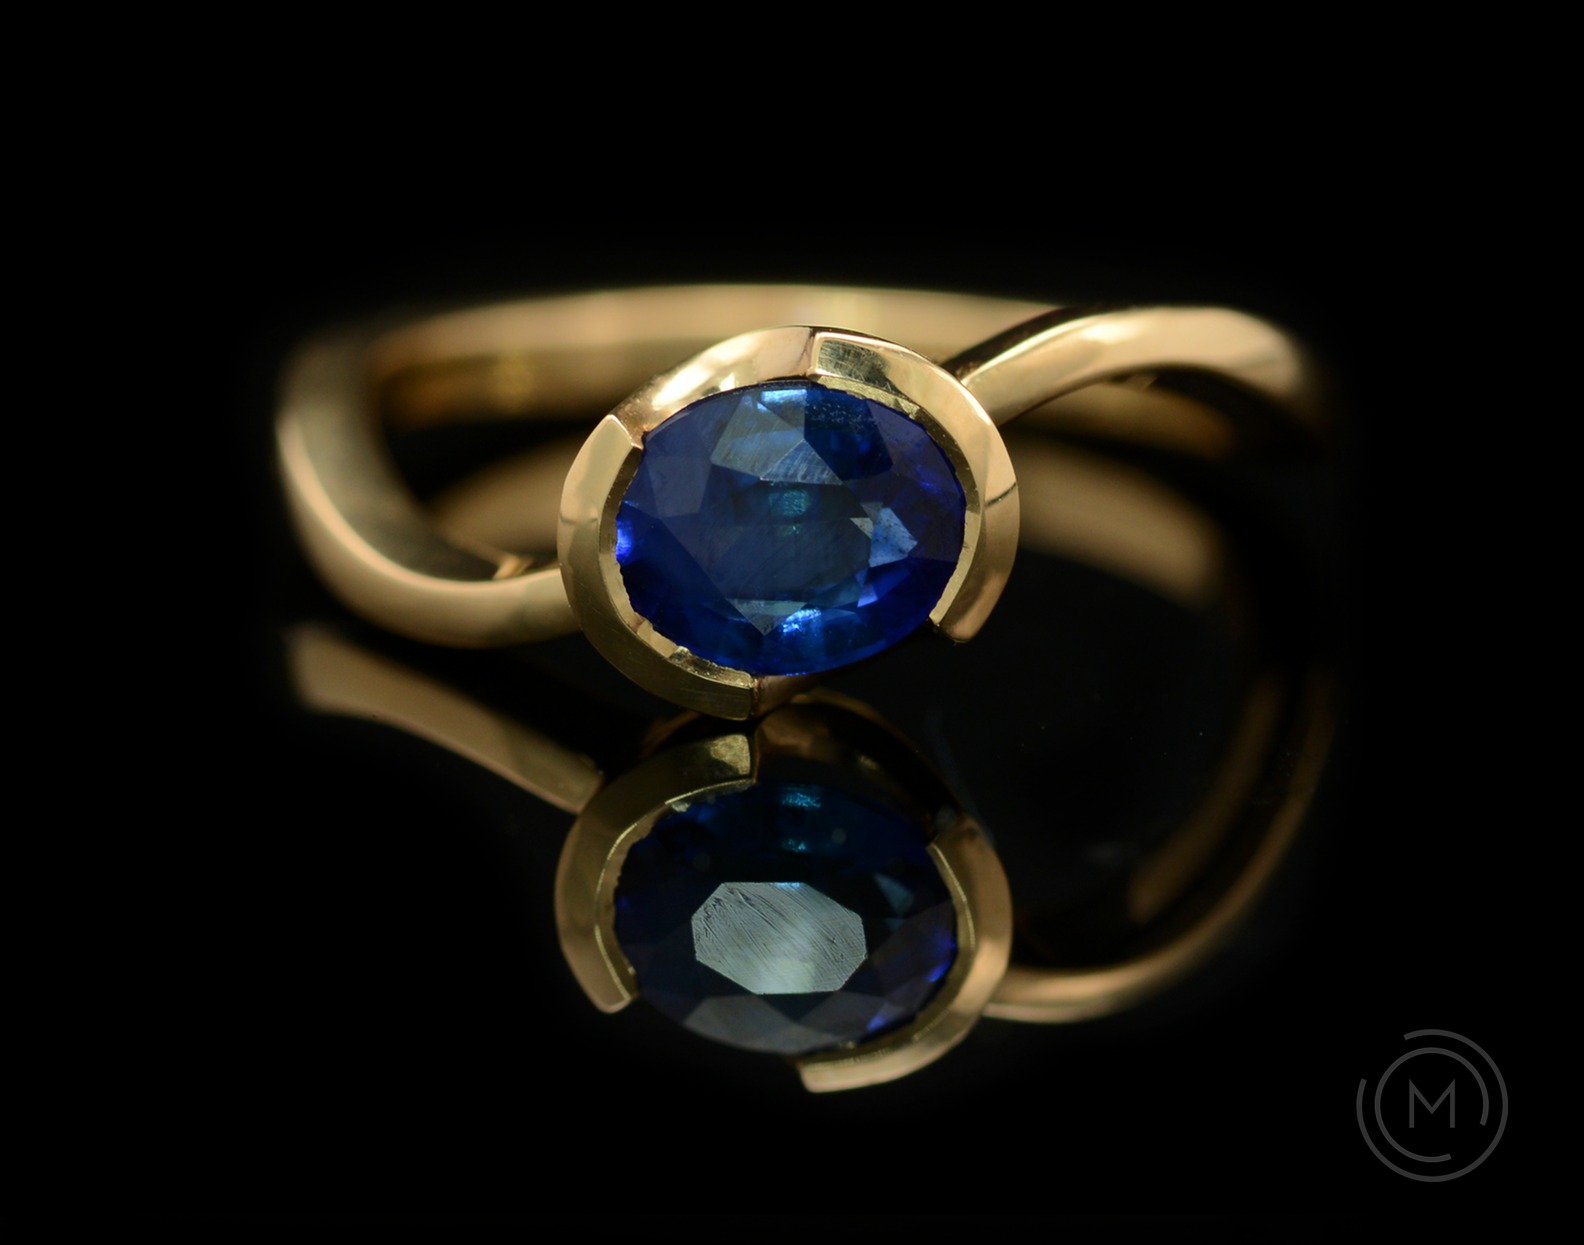 S-curve rose gold and blue sapphire engagement ring